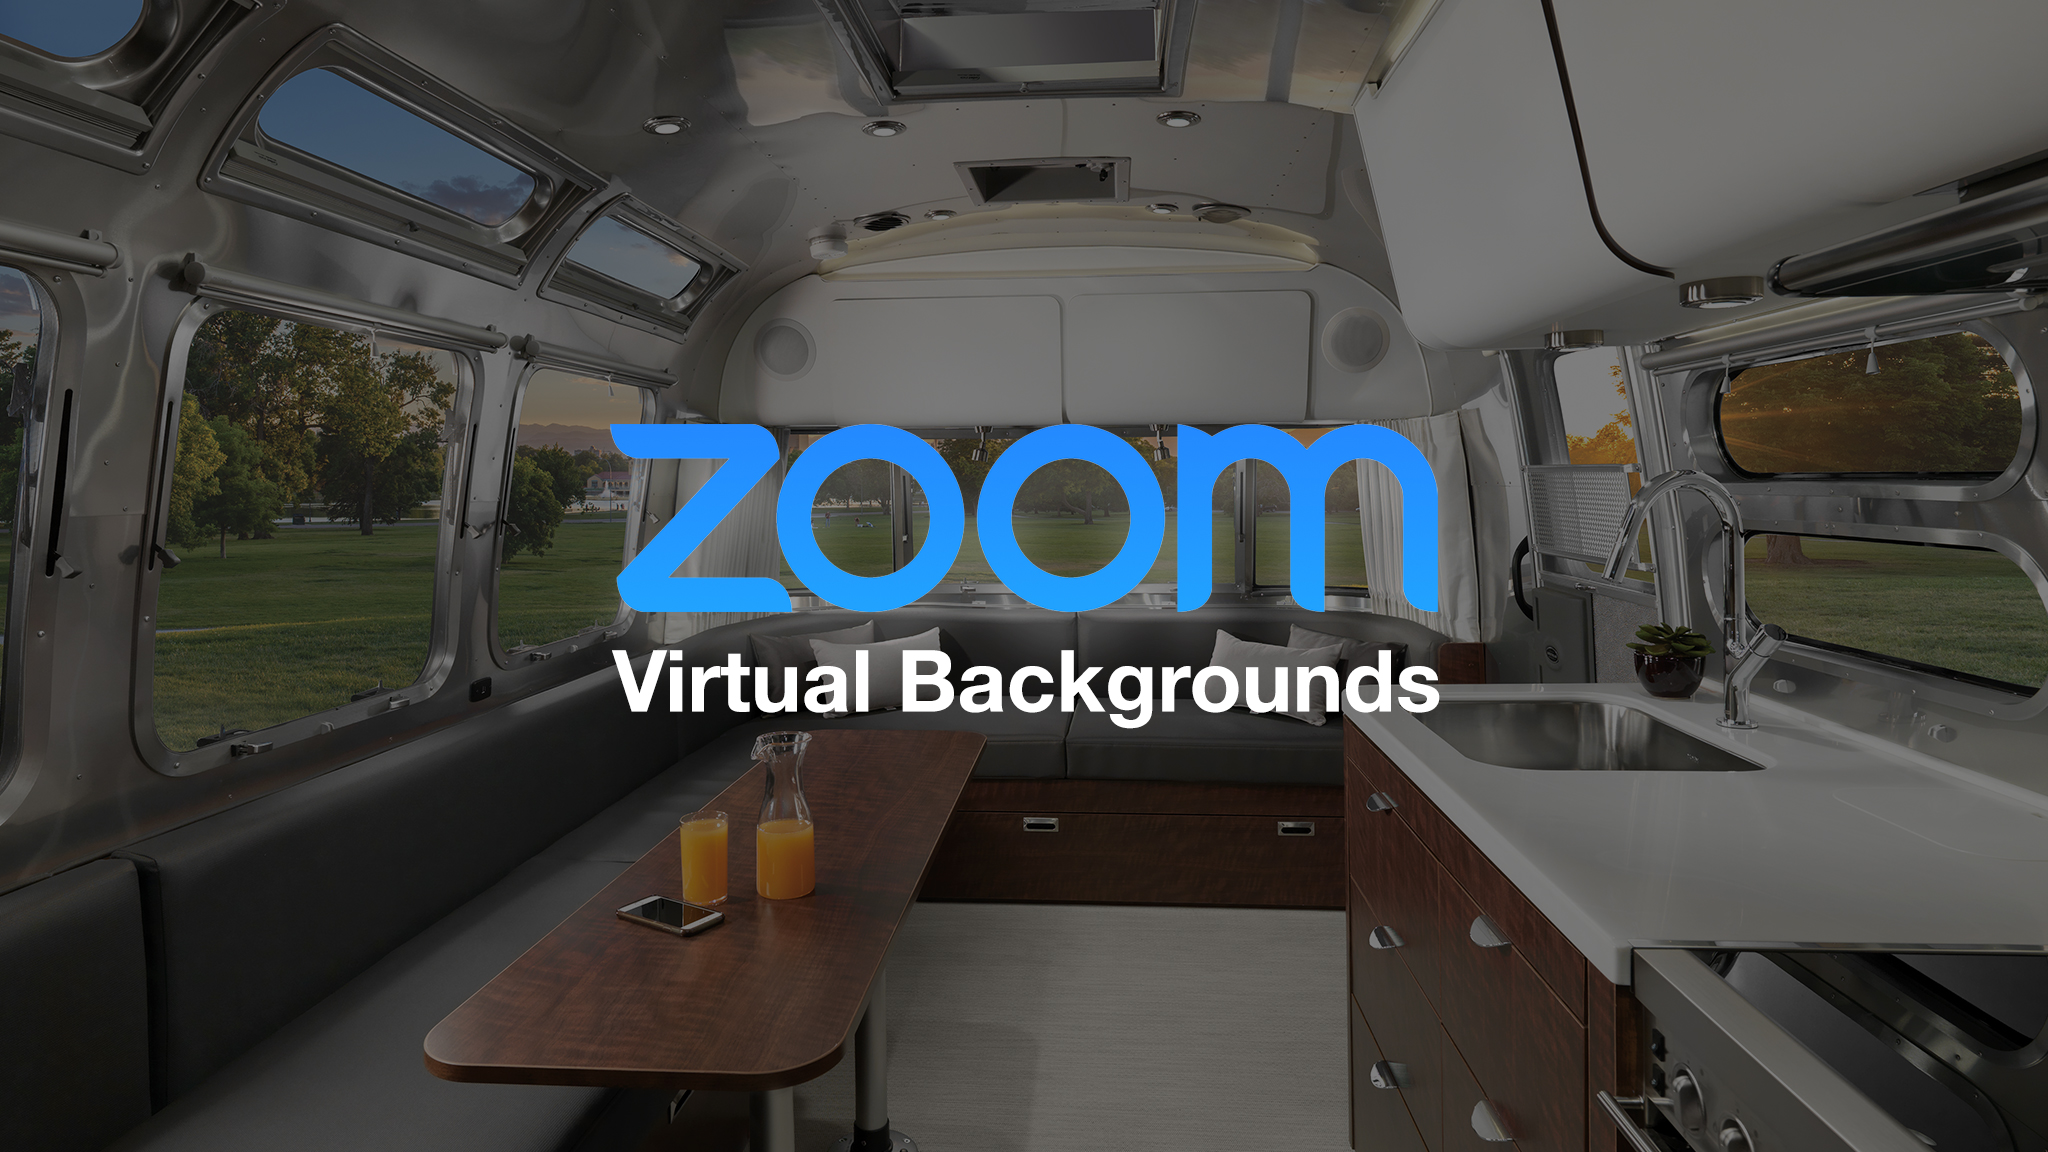 Custom Airstream Backgrounds for Zoom Calls - Airstreams for Video Chats